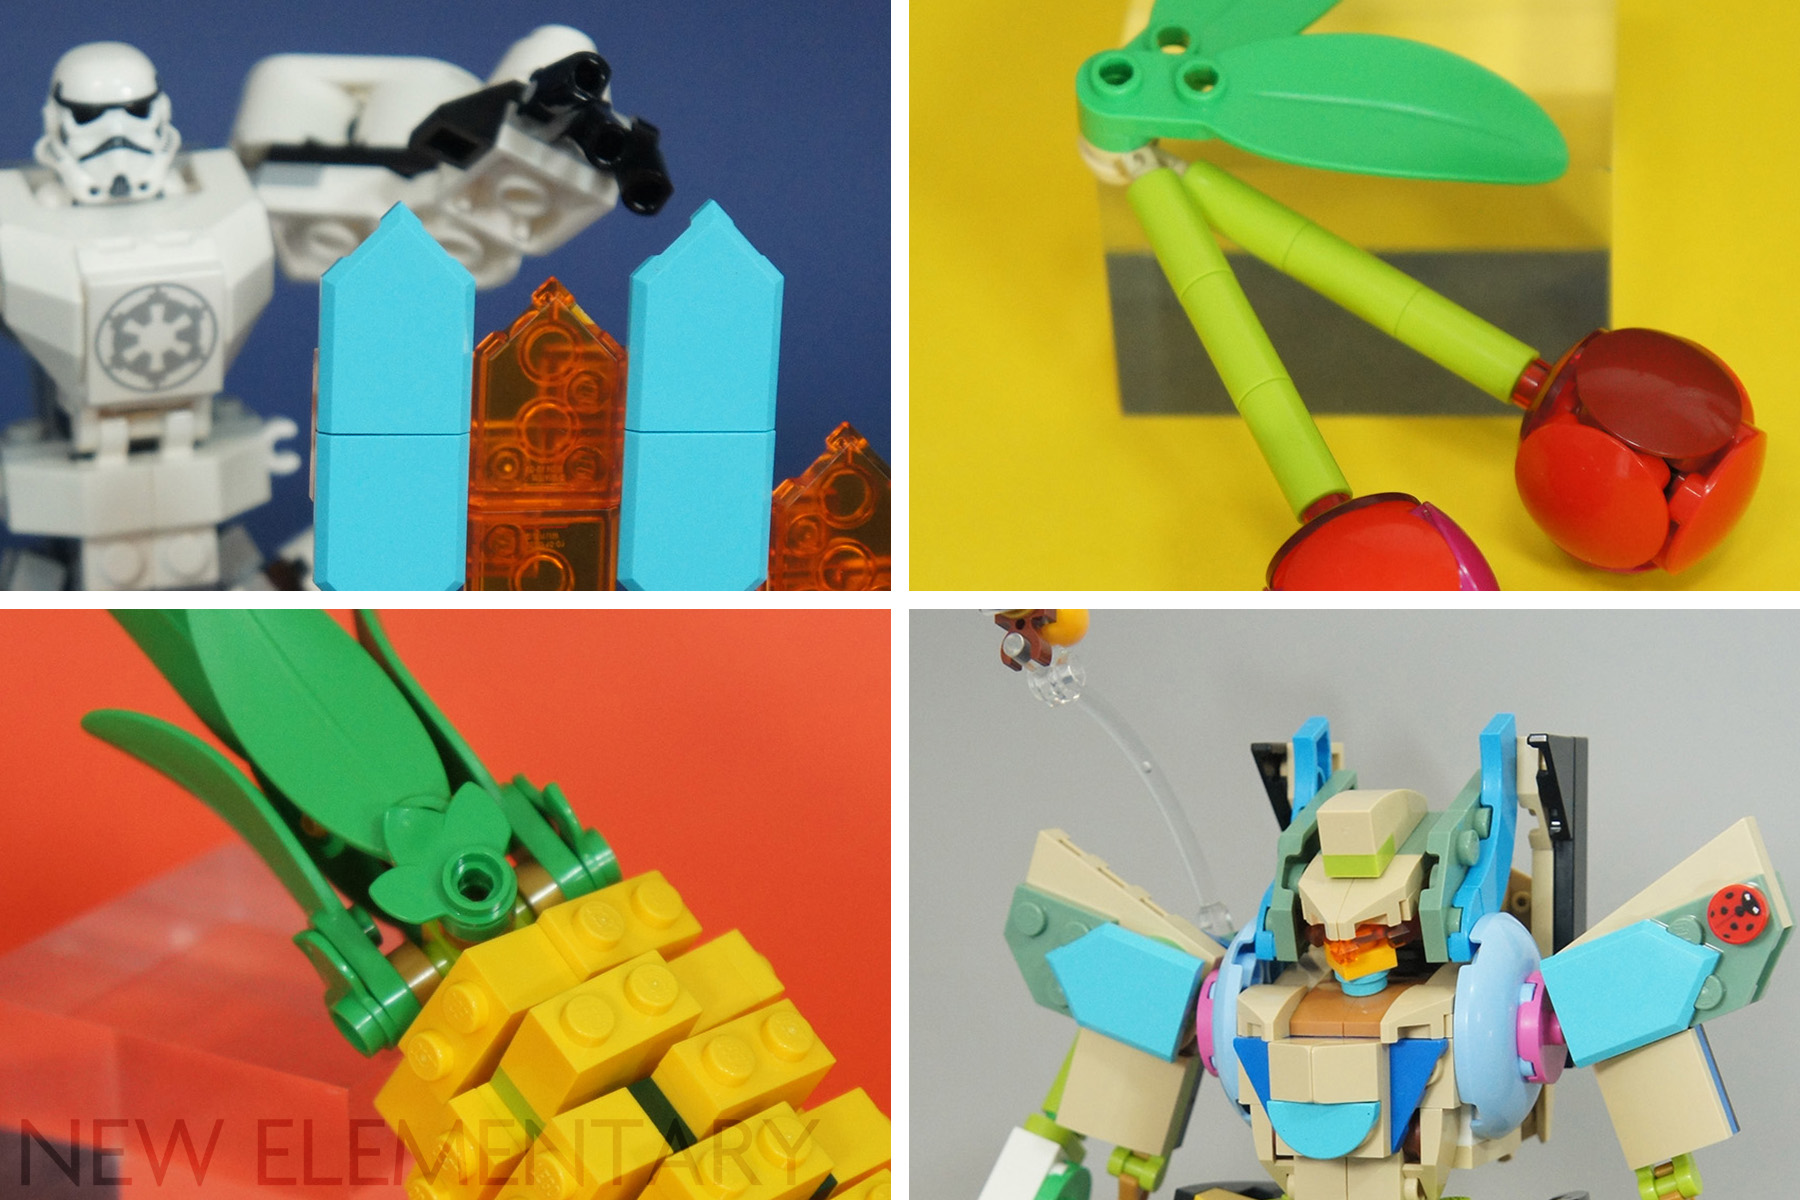 Five things from the LEGO Ideas Sonic the Hedgehog 2023 sets